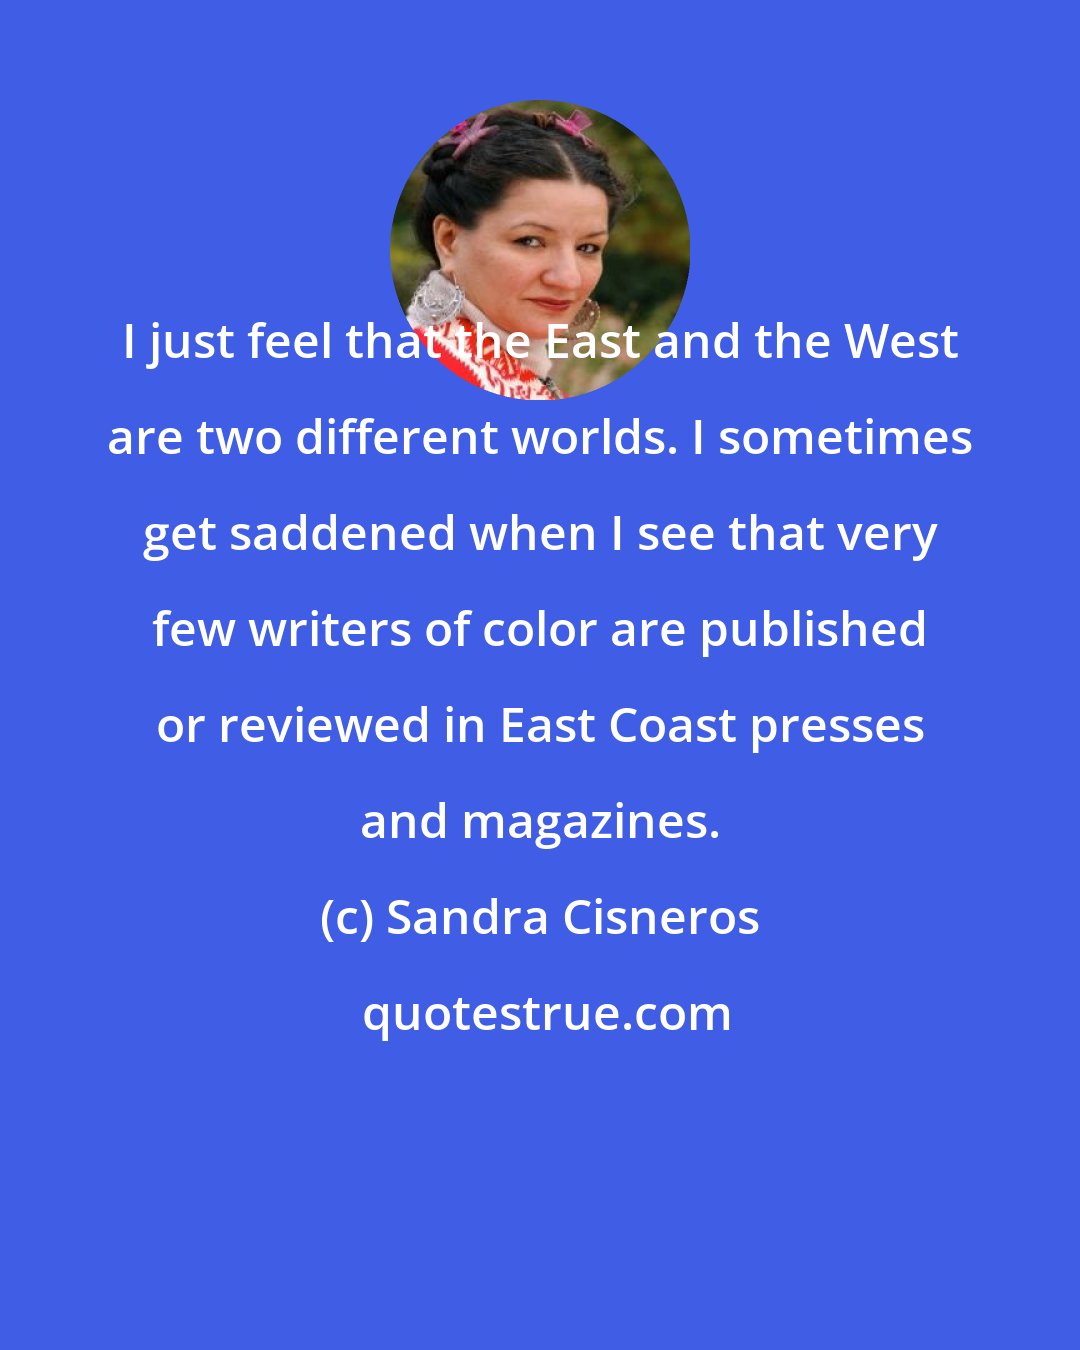 Sandra Cisneros: I just feel that the East and the West are two different worlds. I sometimes get saddened when I see that very few writers of color are published or reviewed in East Coast presses and magazines.